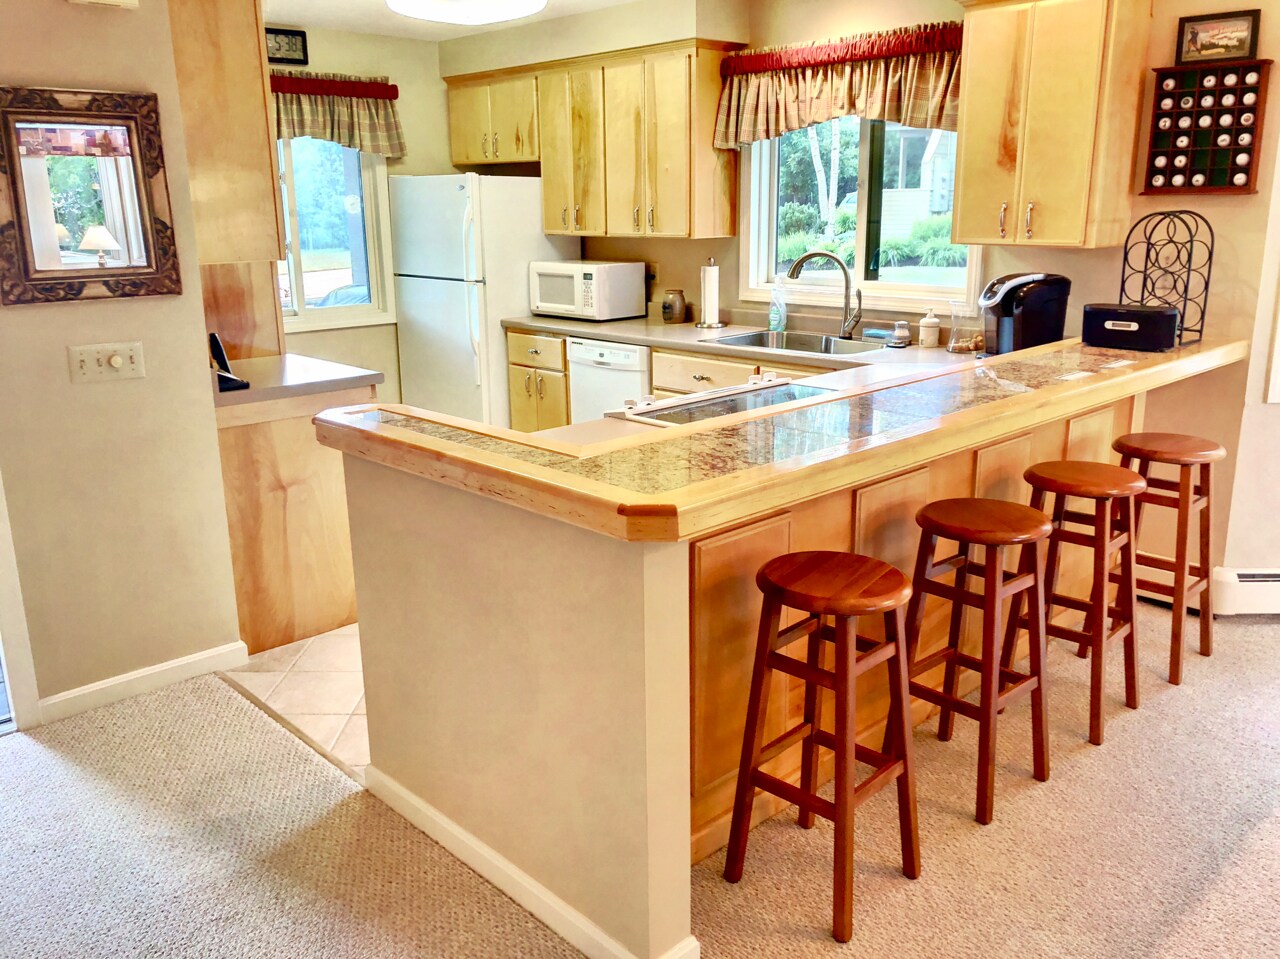 The kitchen is fully stocked for all your cooking needs and features Keurig coffee maker and a breakfast bar that seats 4.